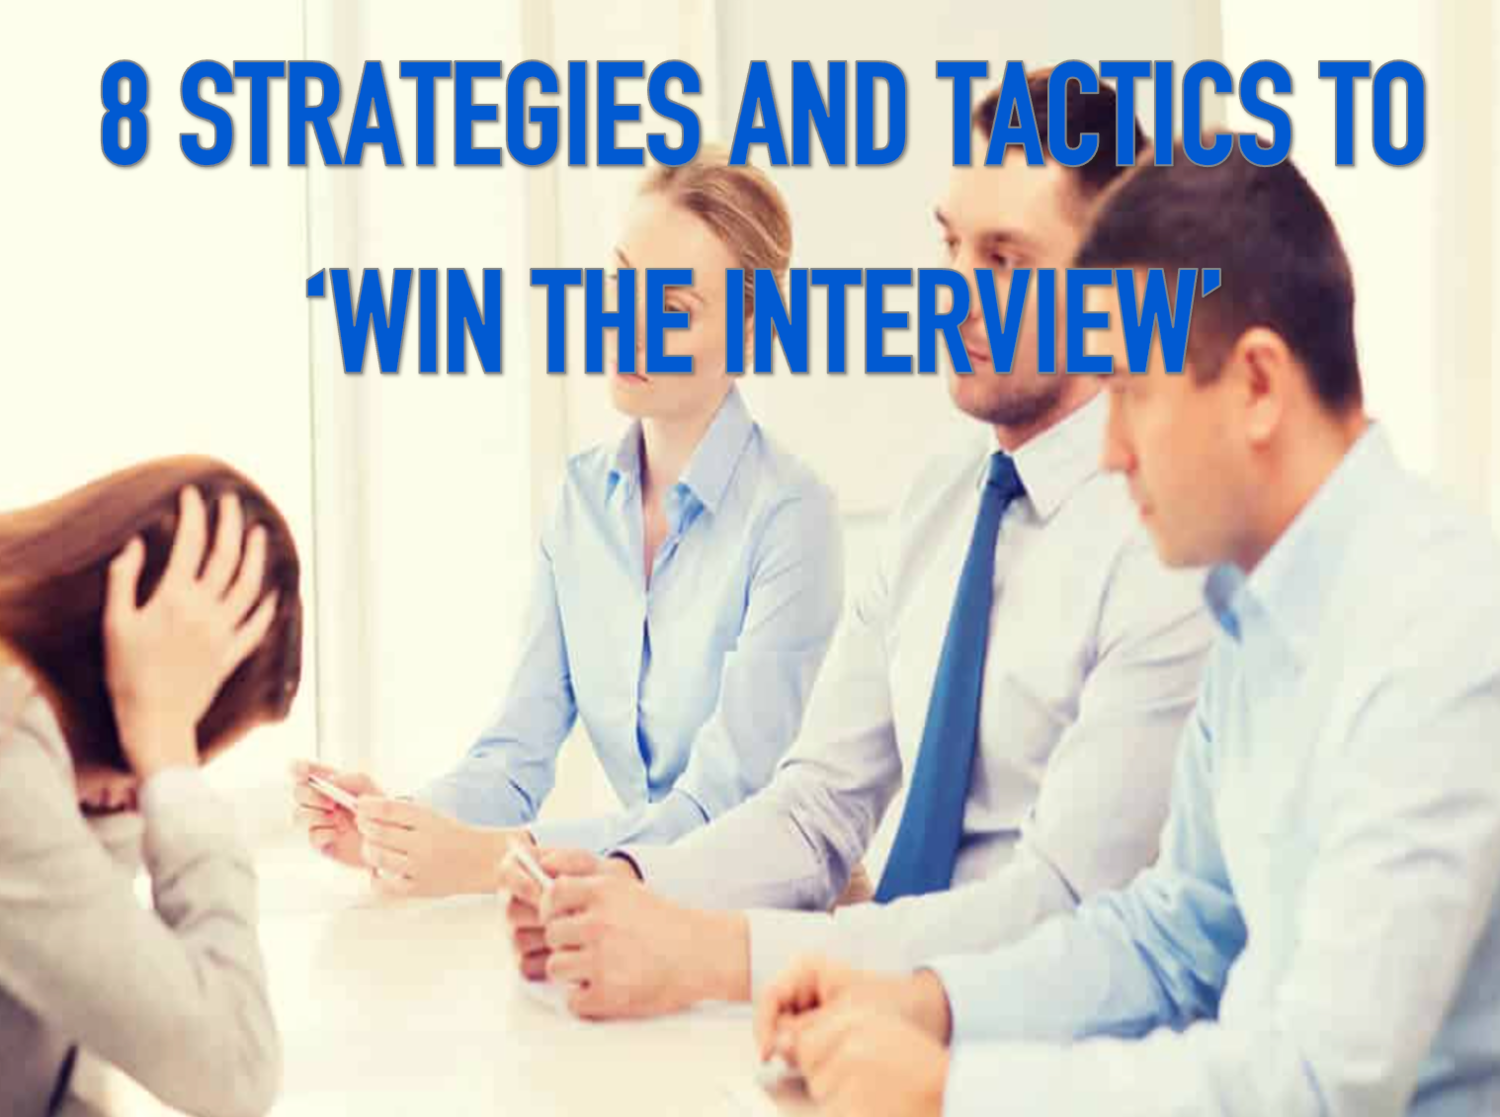 STRATEGIES AND TACTICS TO WIN THE INTERVIEW - 8 STEPS FOR SUCCESS ON YOUR NEXT INTERVIEW
SALE 25% OFF FOR A LIMITED TIME!